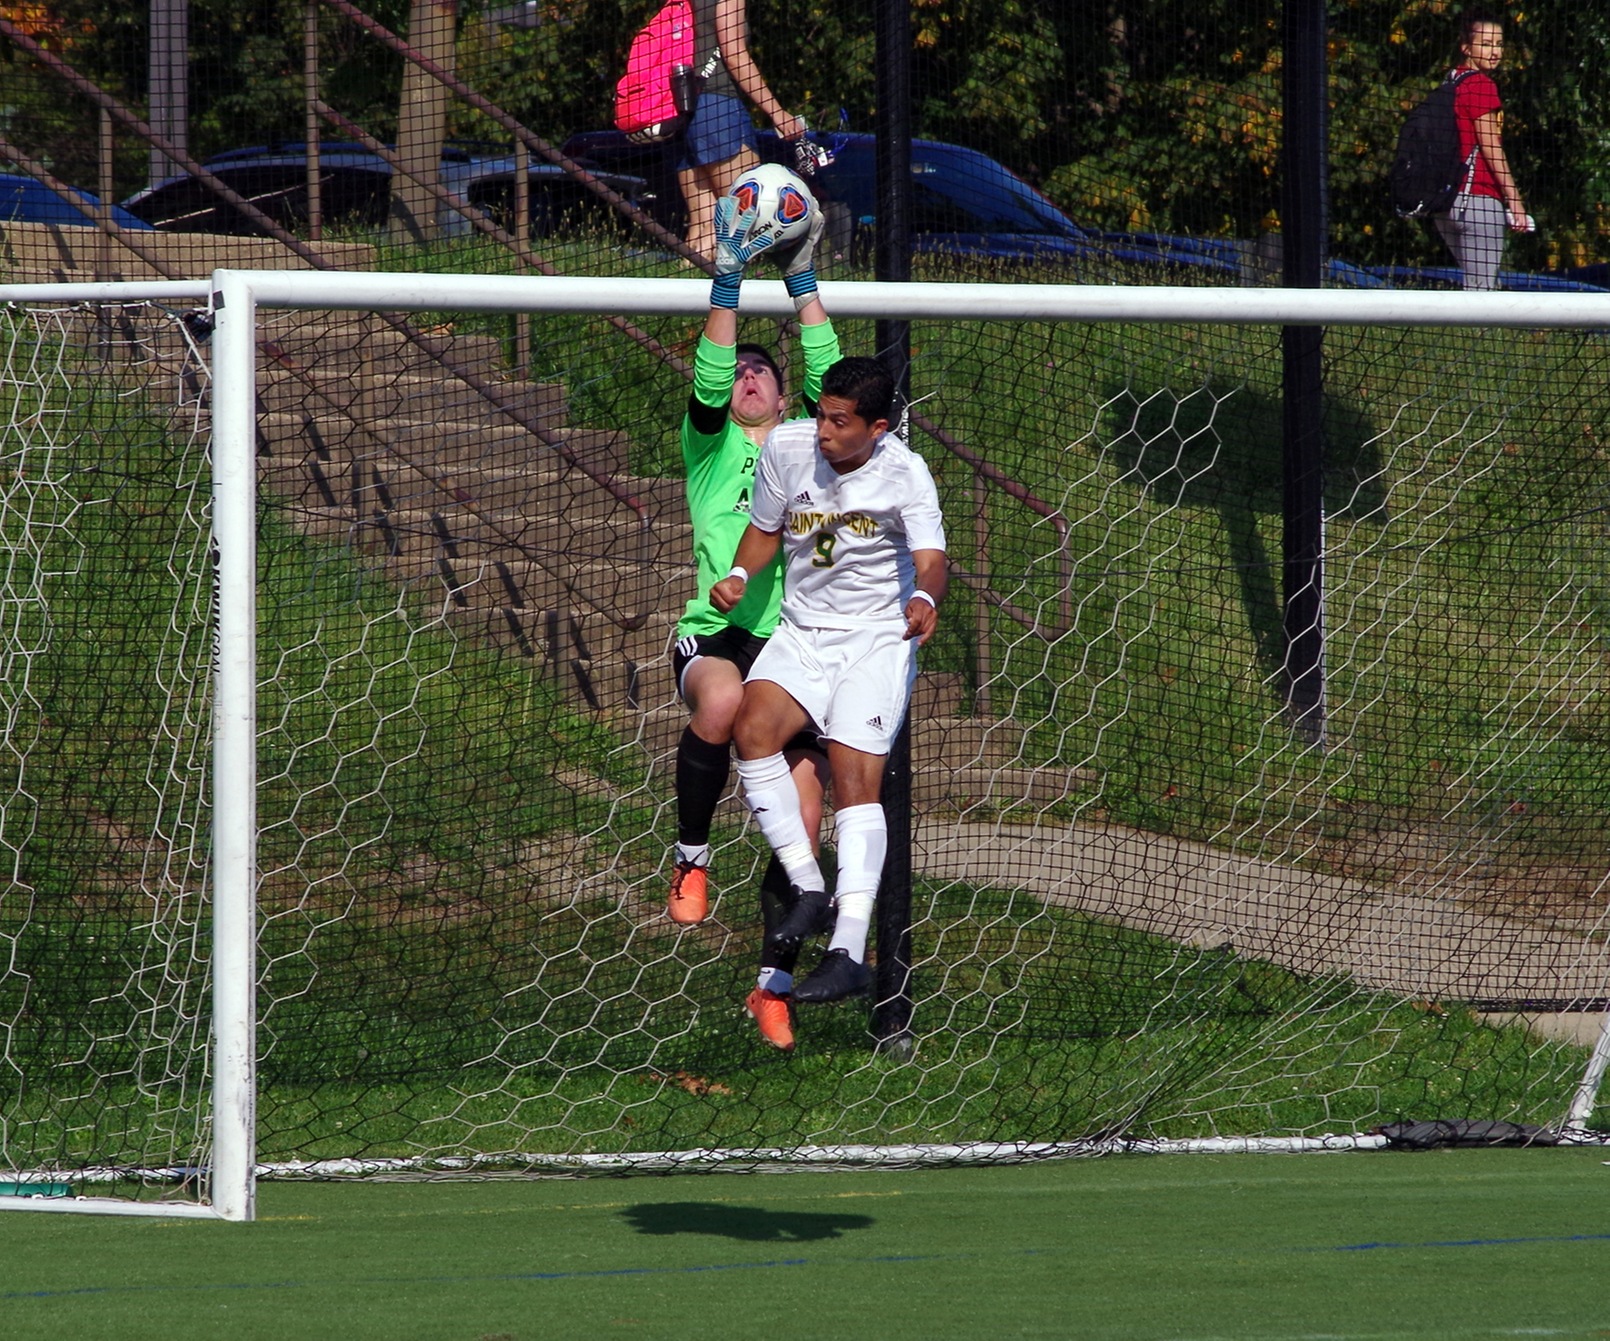 Photo (courtesy of Saint Vincent College Sports Information): Penn State Altoona sophomore goalkeeper Tanner Yaw goes up to grab the ball in front of Saint Vincent College's #9 Ian Garay during Wednesday afternoon's game.